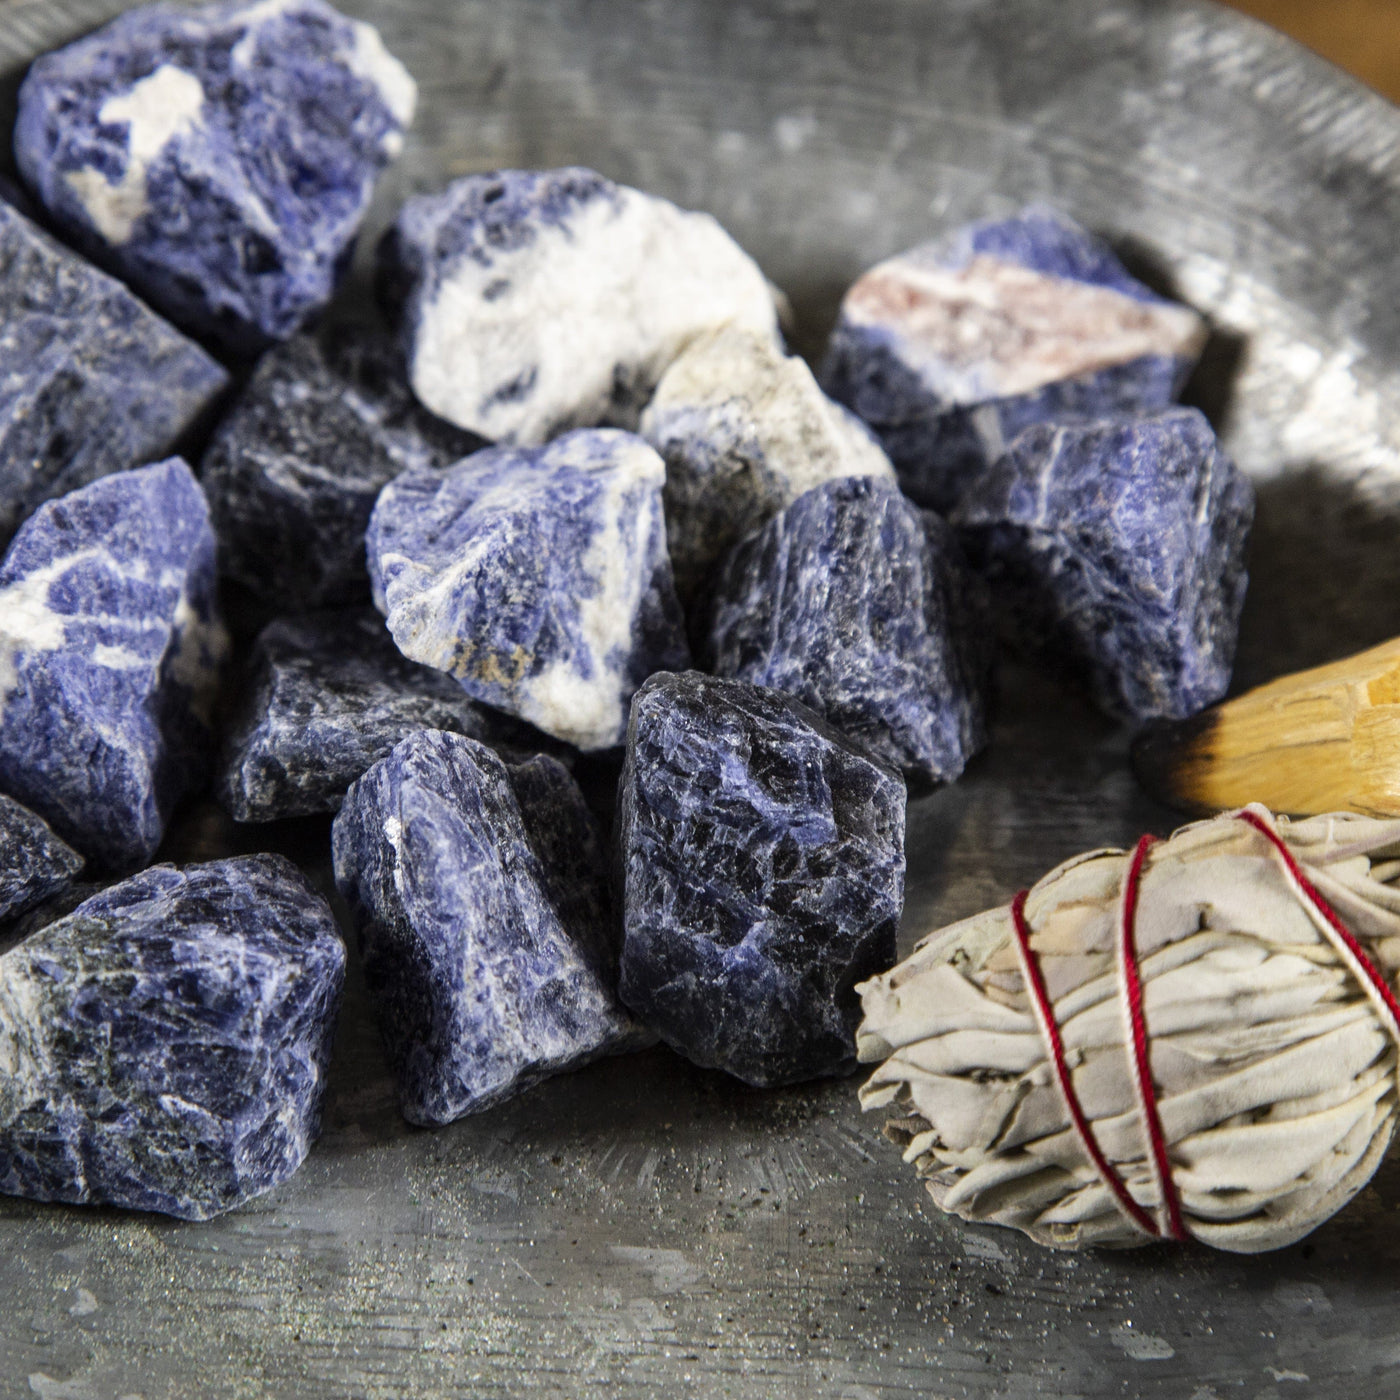 close up of many sodalite rough stones in a pile on display